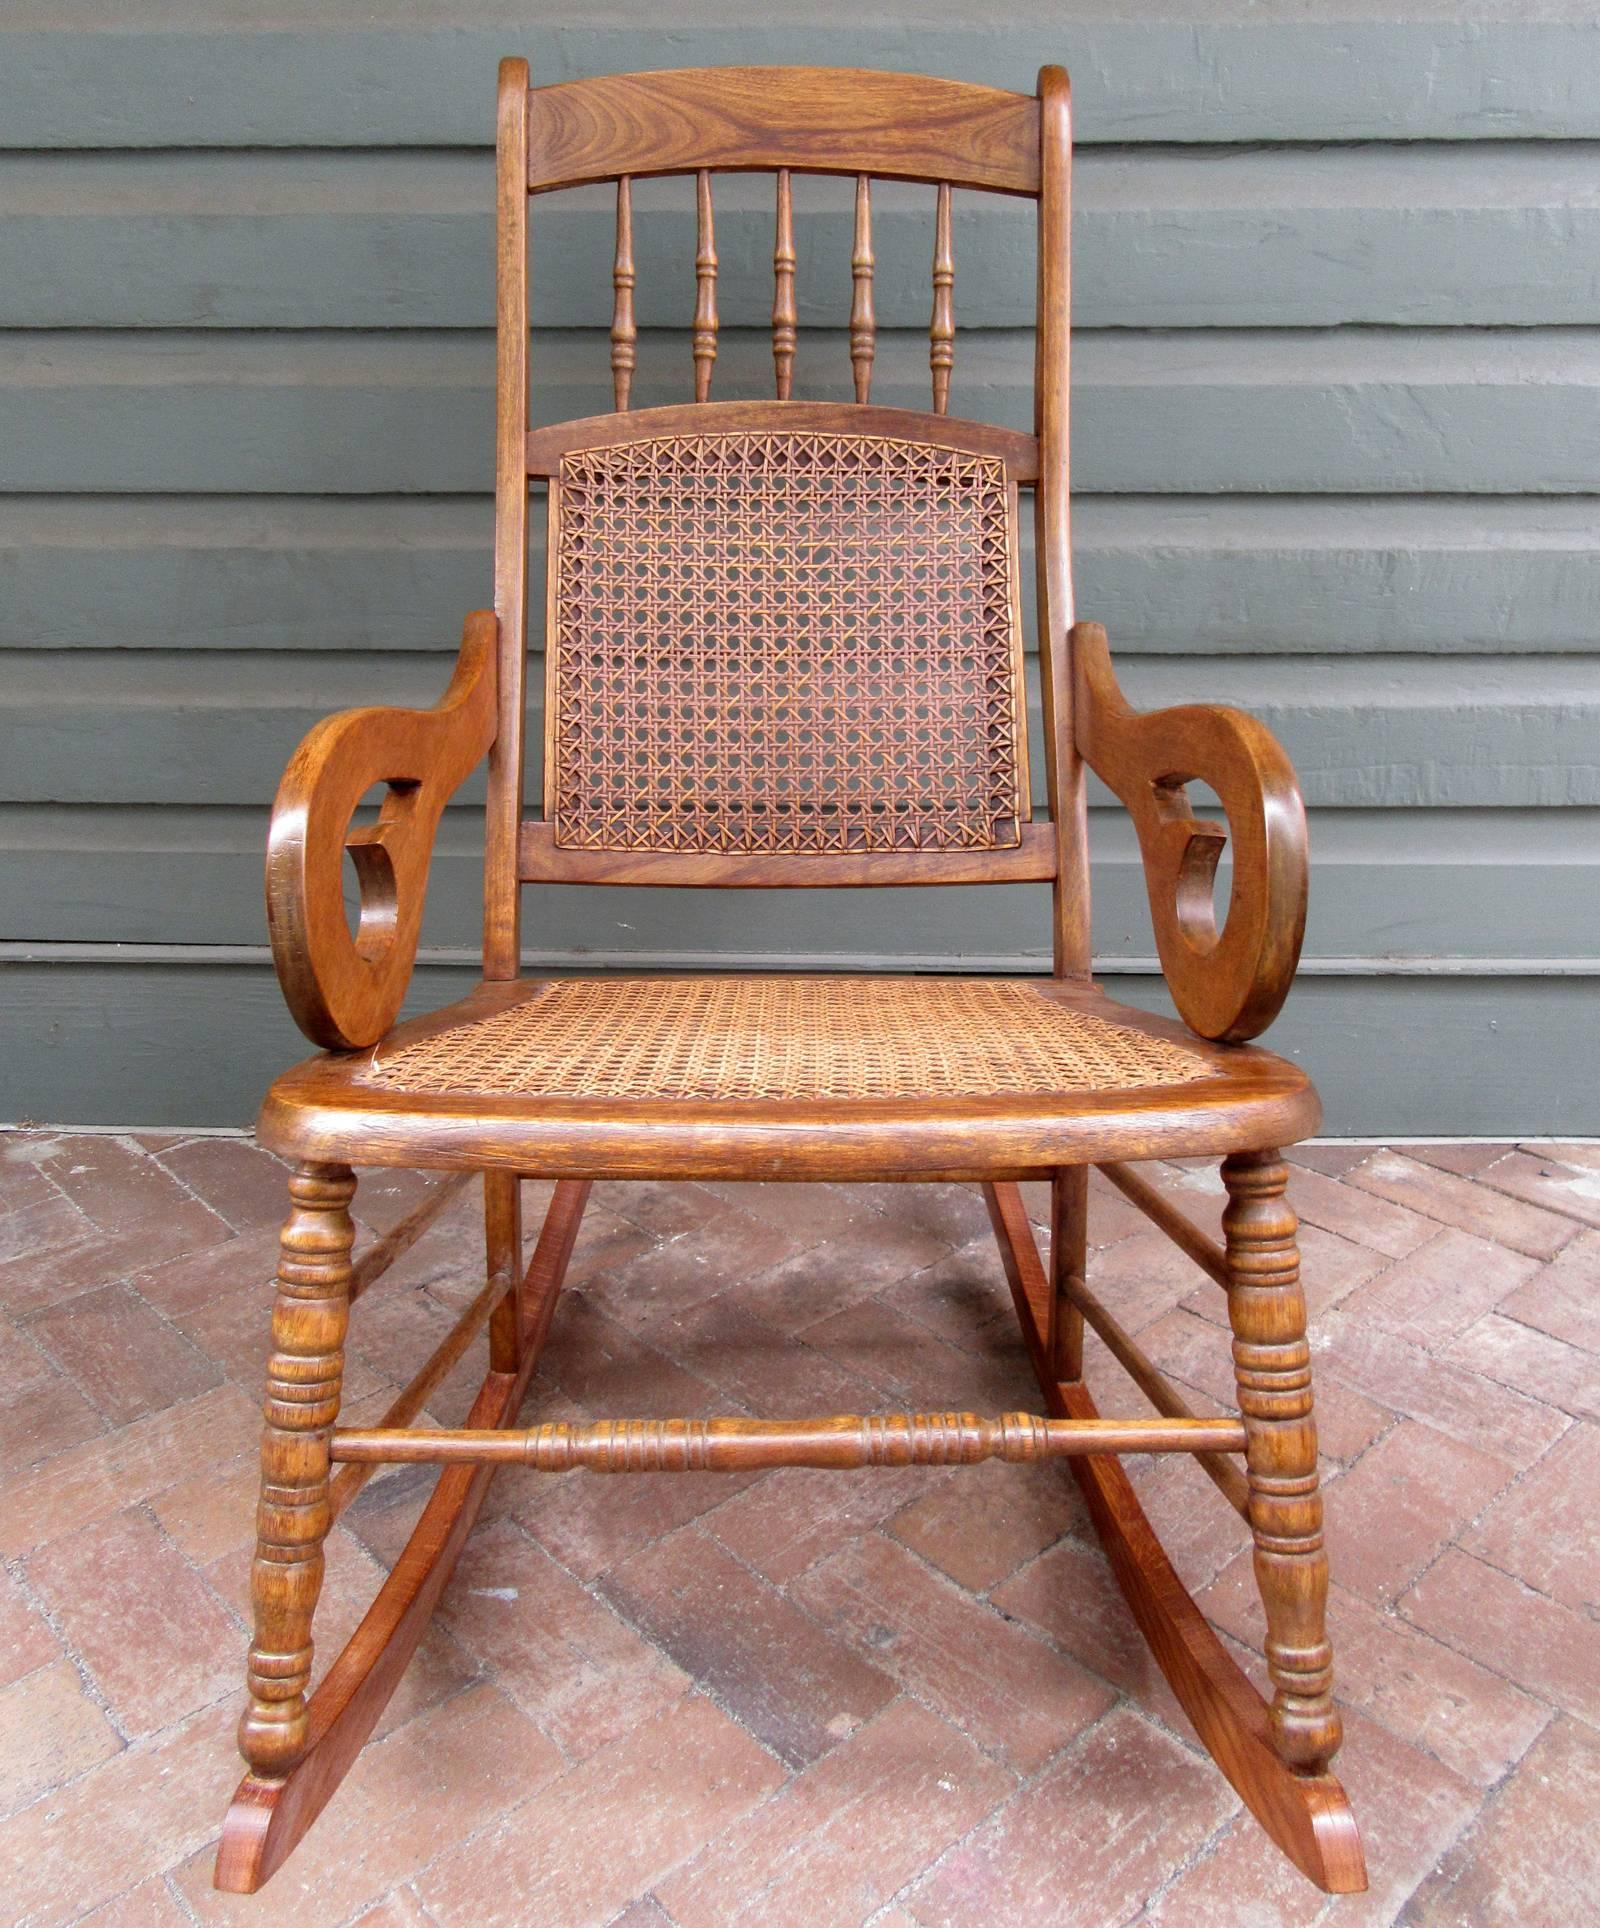 Hand-Carved Mid-19th Century St. Croix Regency Mahogany and Cane Rocking Chair For Sale